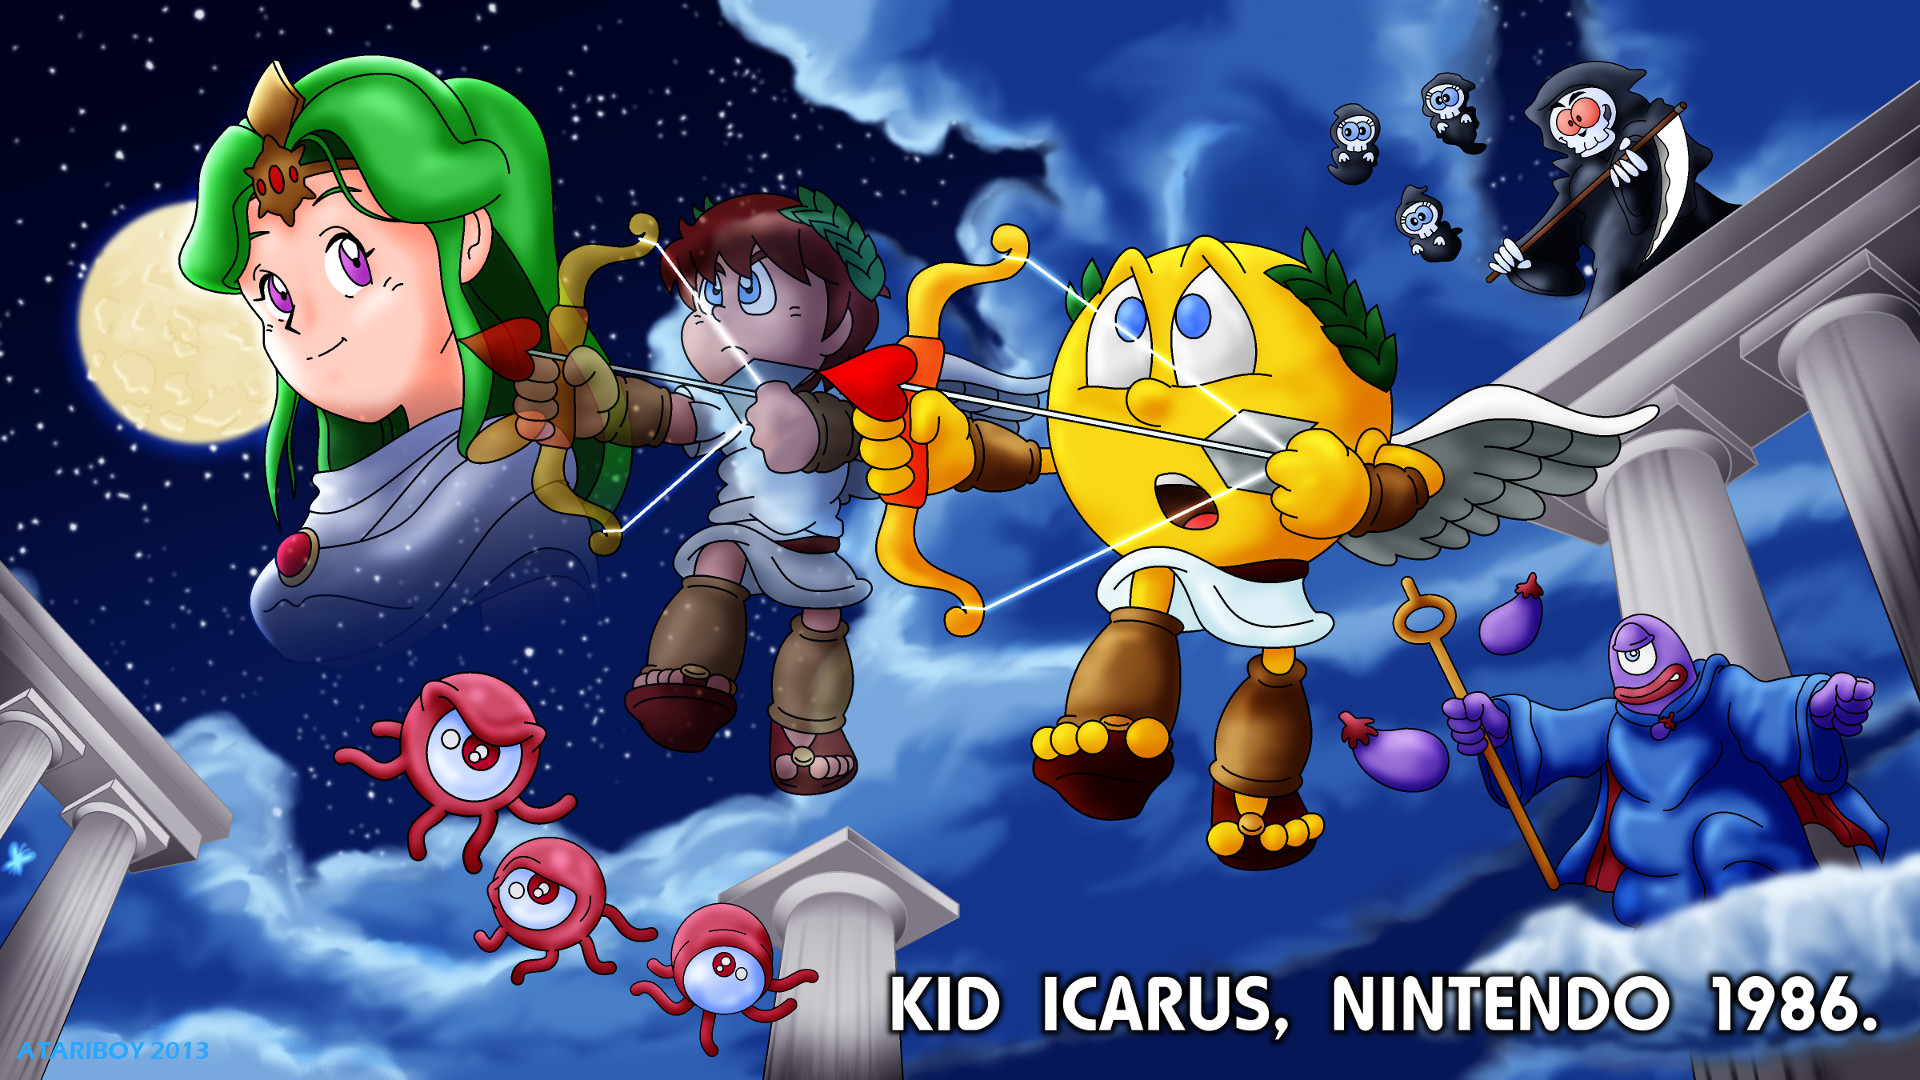 1920x1080 ... Pacman Fanfic - Kid Icarus 1986. by Atariboy2600